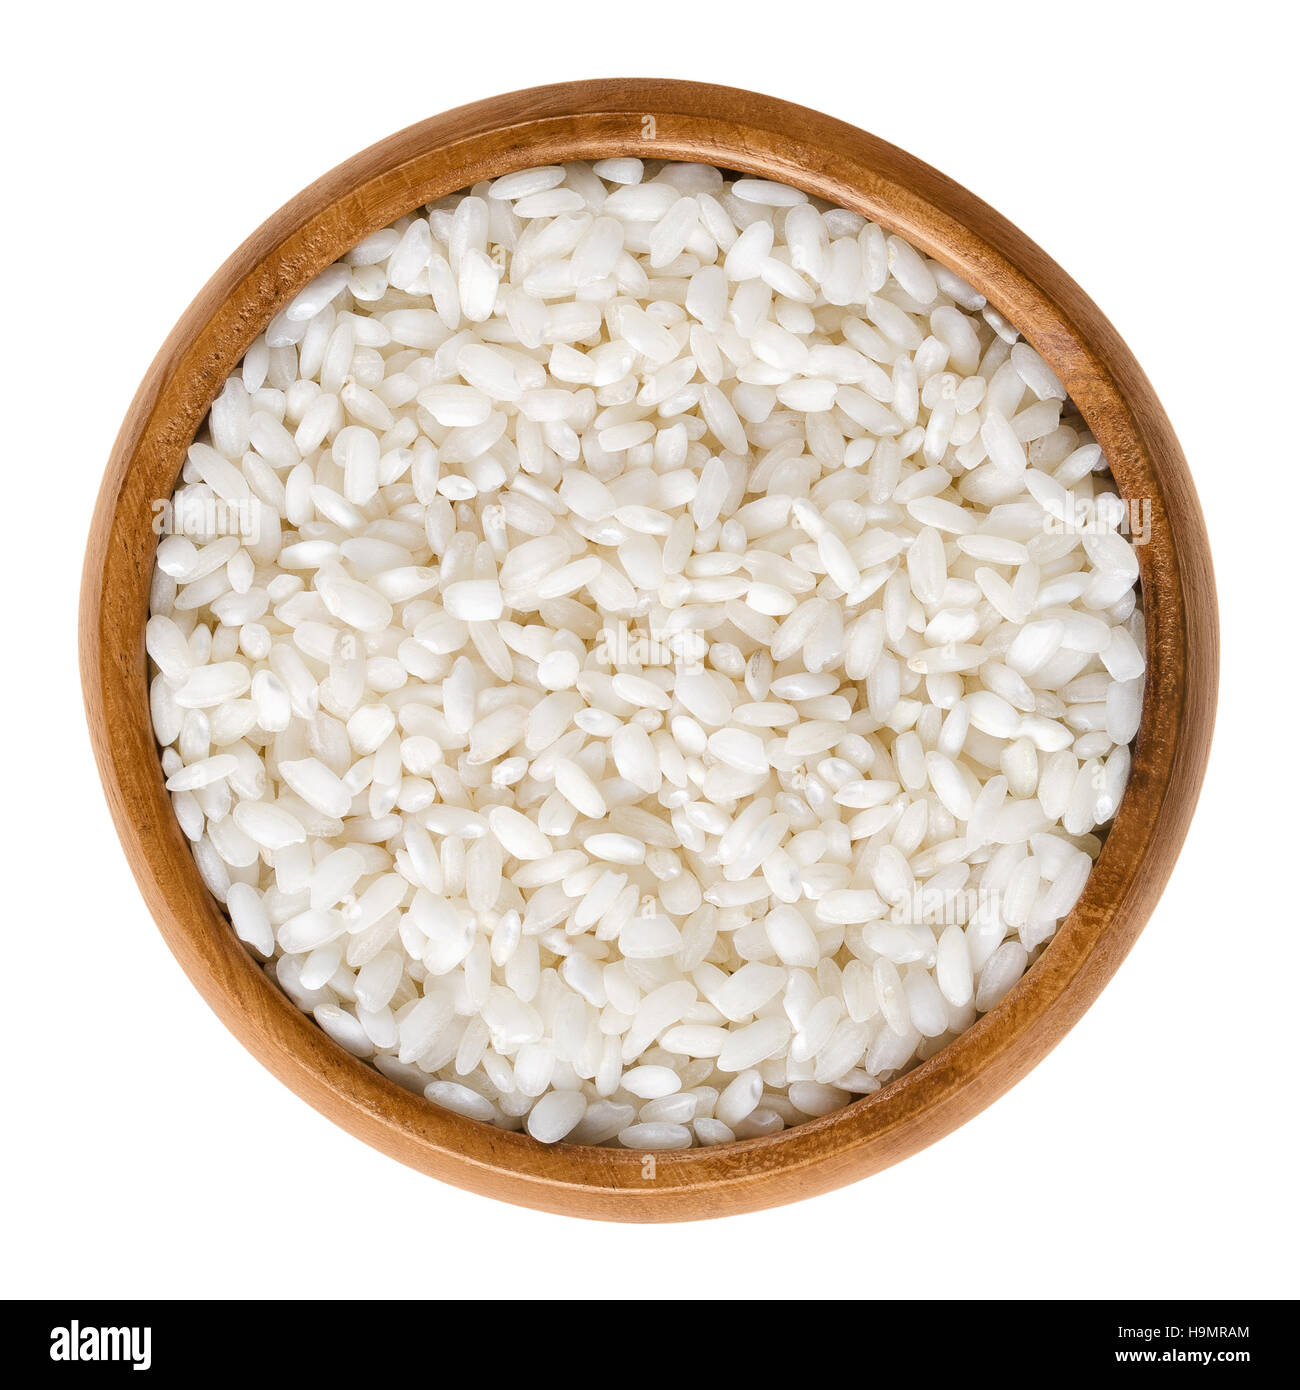 Arborio rice in wooden bowl. Italian short-grain rice with rounded grains and higher starch content, used for risotto. Stock Photo